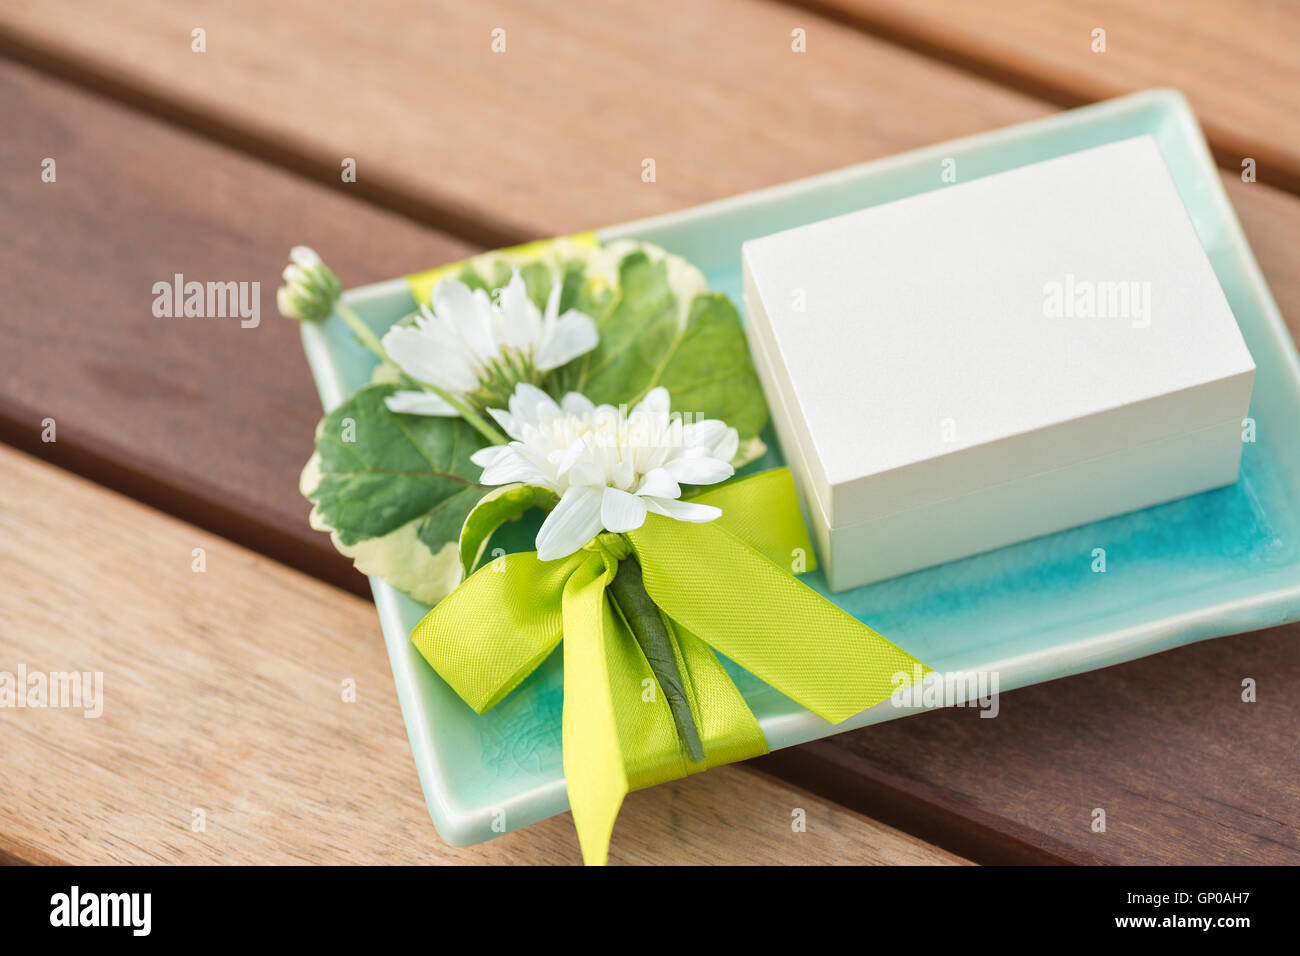 a small white box on decorated turquoise ceramic tray with white flowers and green ribbon Stock Photo